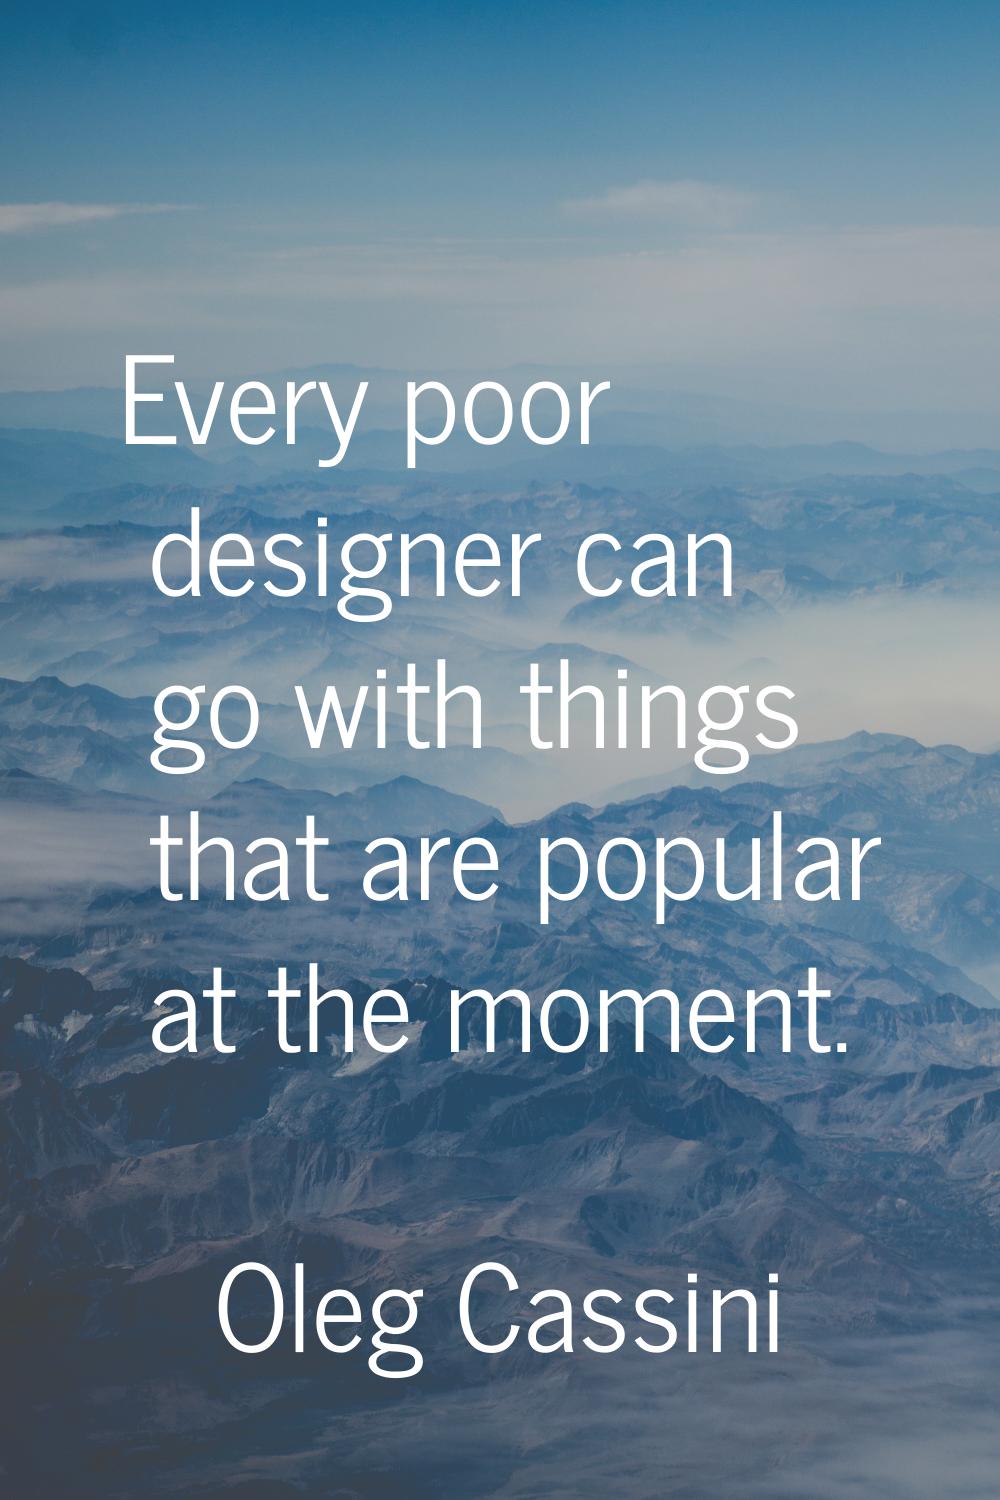 Every poor designer can go with things that are popular at the moment.